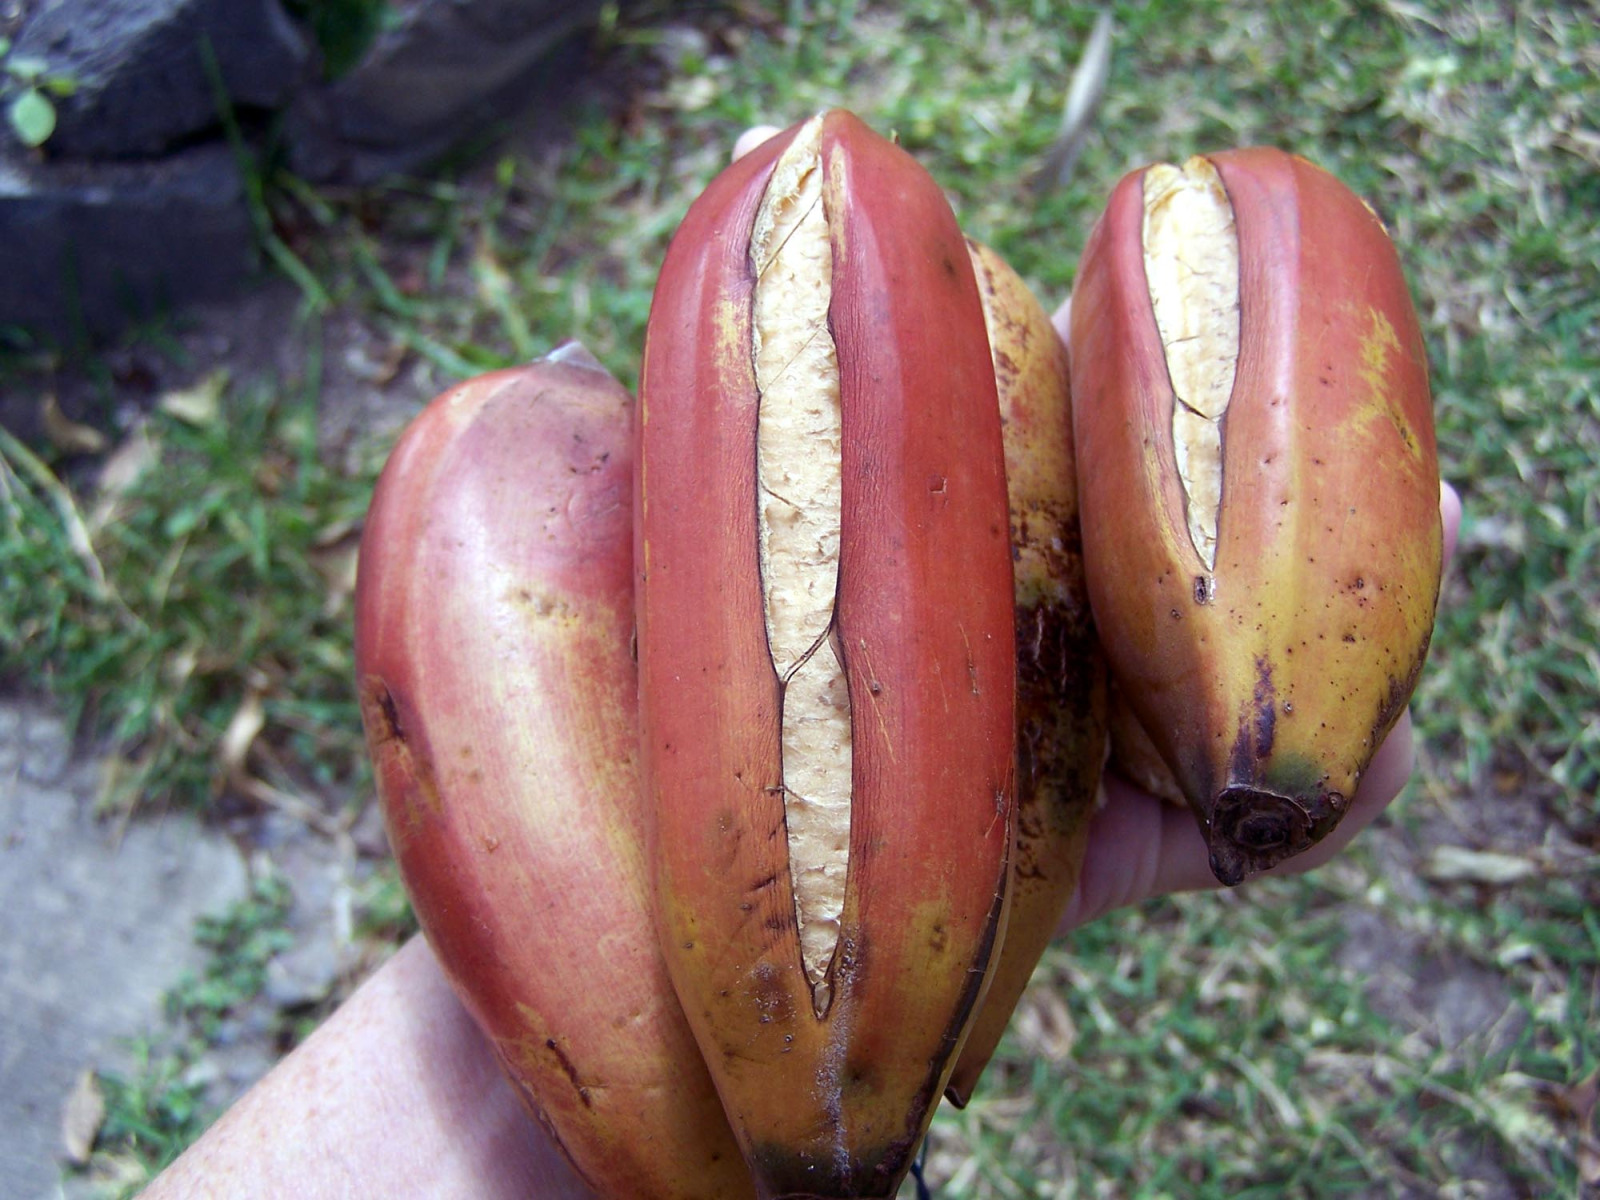 Ripe red bananas from a RV park tree